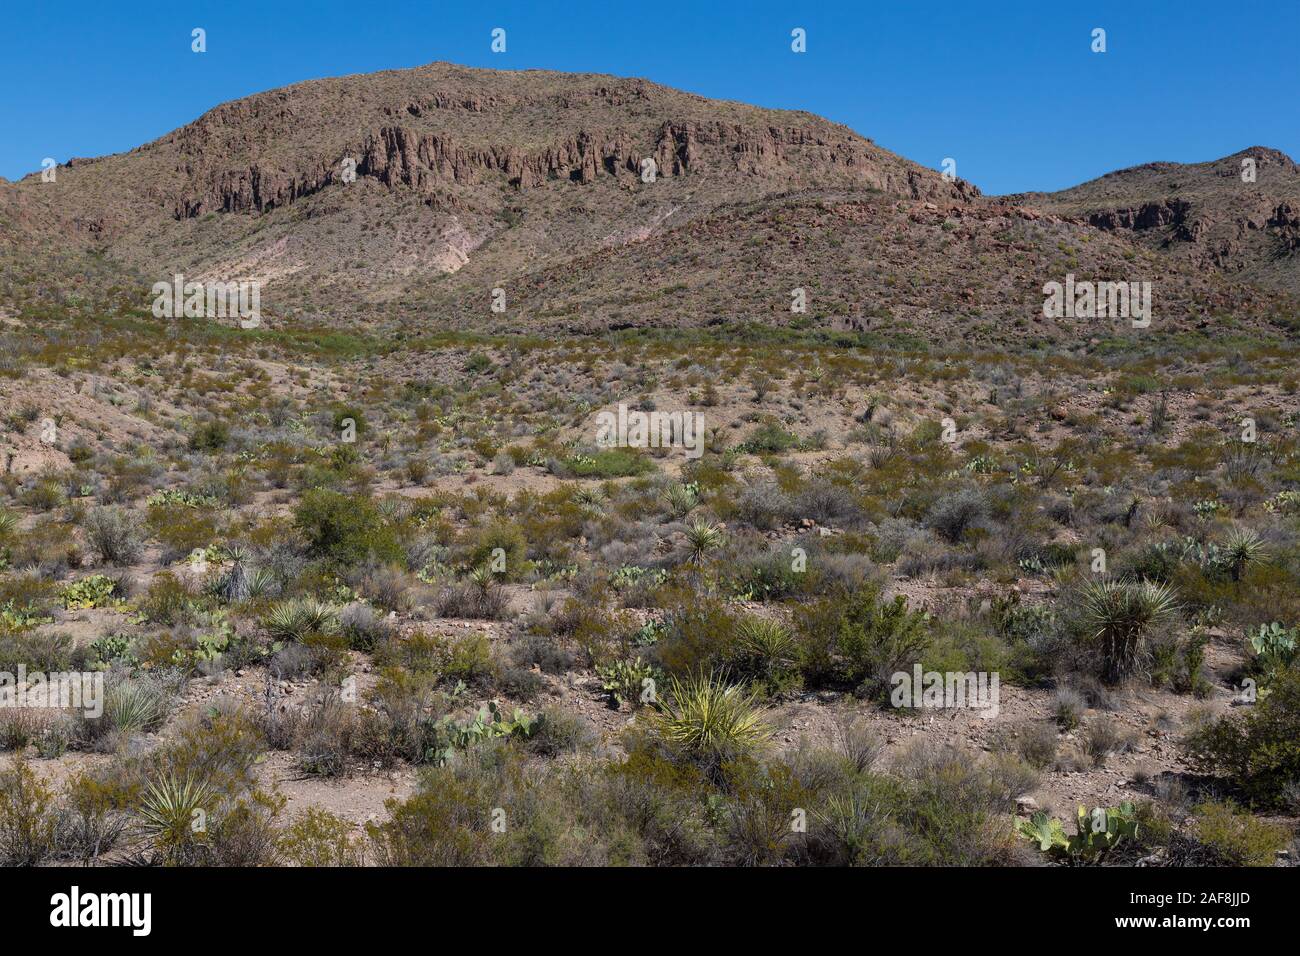 Big Bend National Park, Texas. Scenic View along Mule Ears Spring Trail.  Chihuahuan Desert Vegetation, Chisos Mountains. Stock Photo